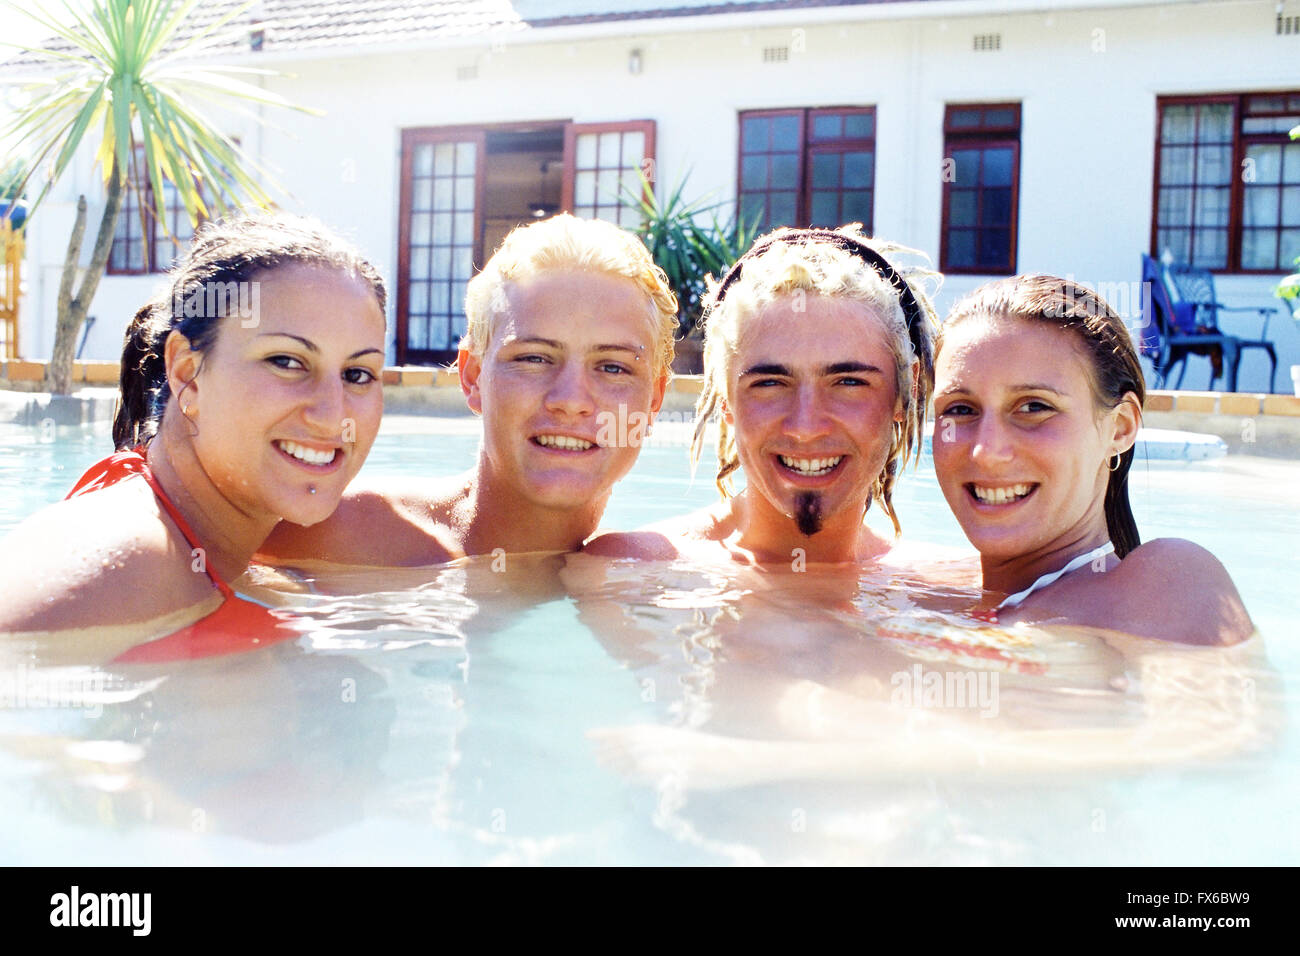 Caucasian friends smiling in swimming pool Stock Photo